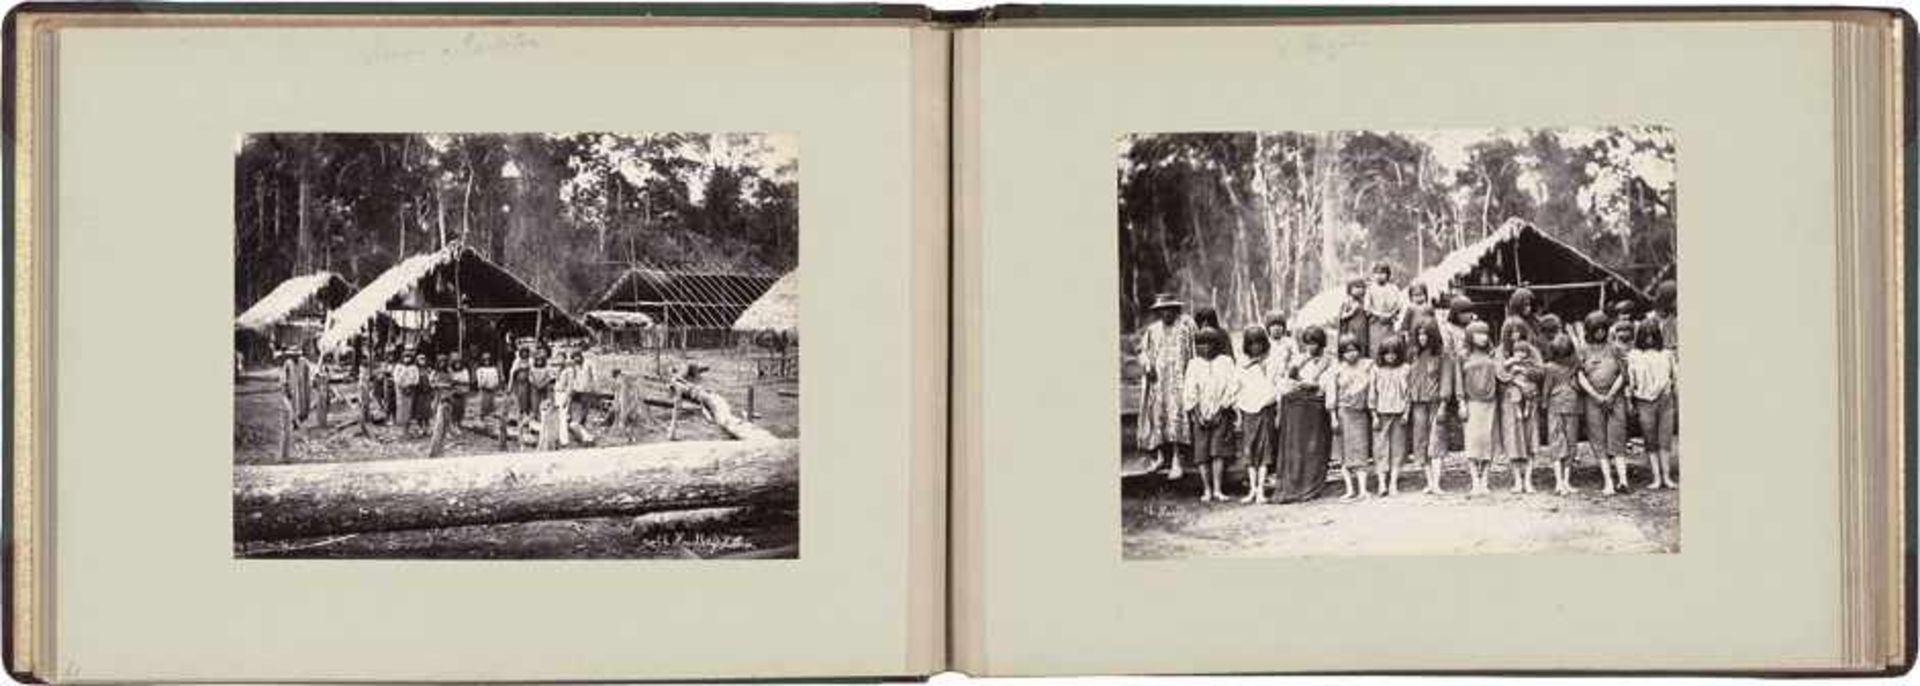 Amazonia / Koch-Grünberg Expedition: Portraits and ethnographical studies of Peru, Brazil and - Image 9 of 9